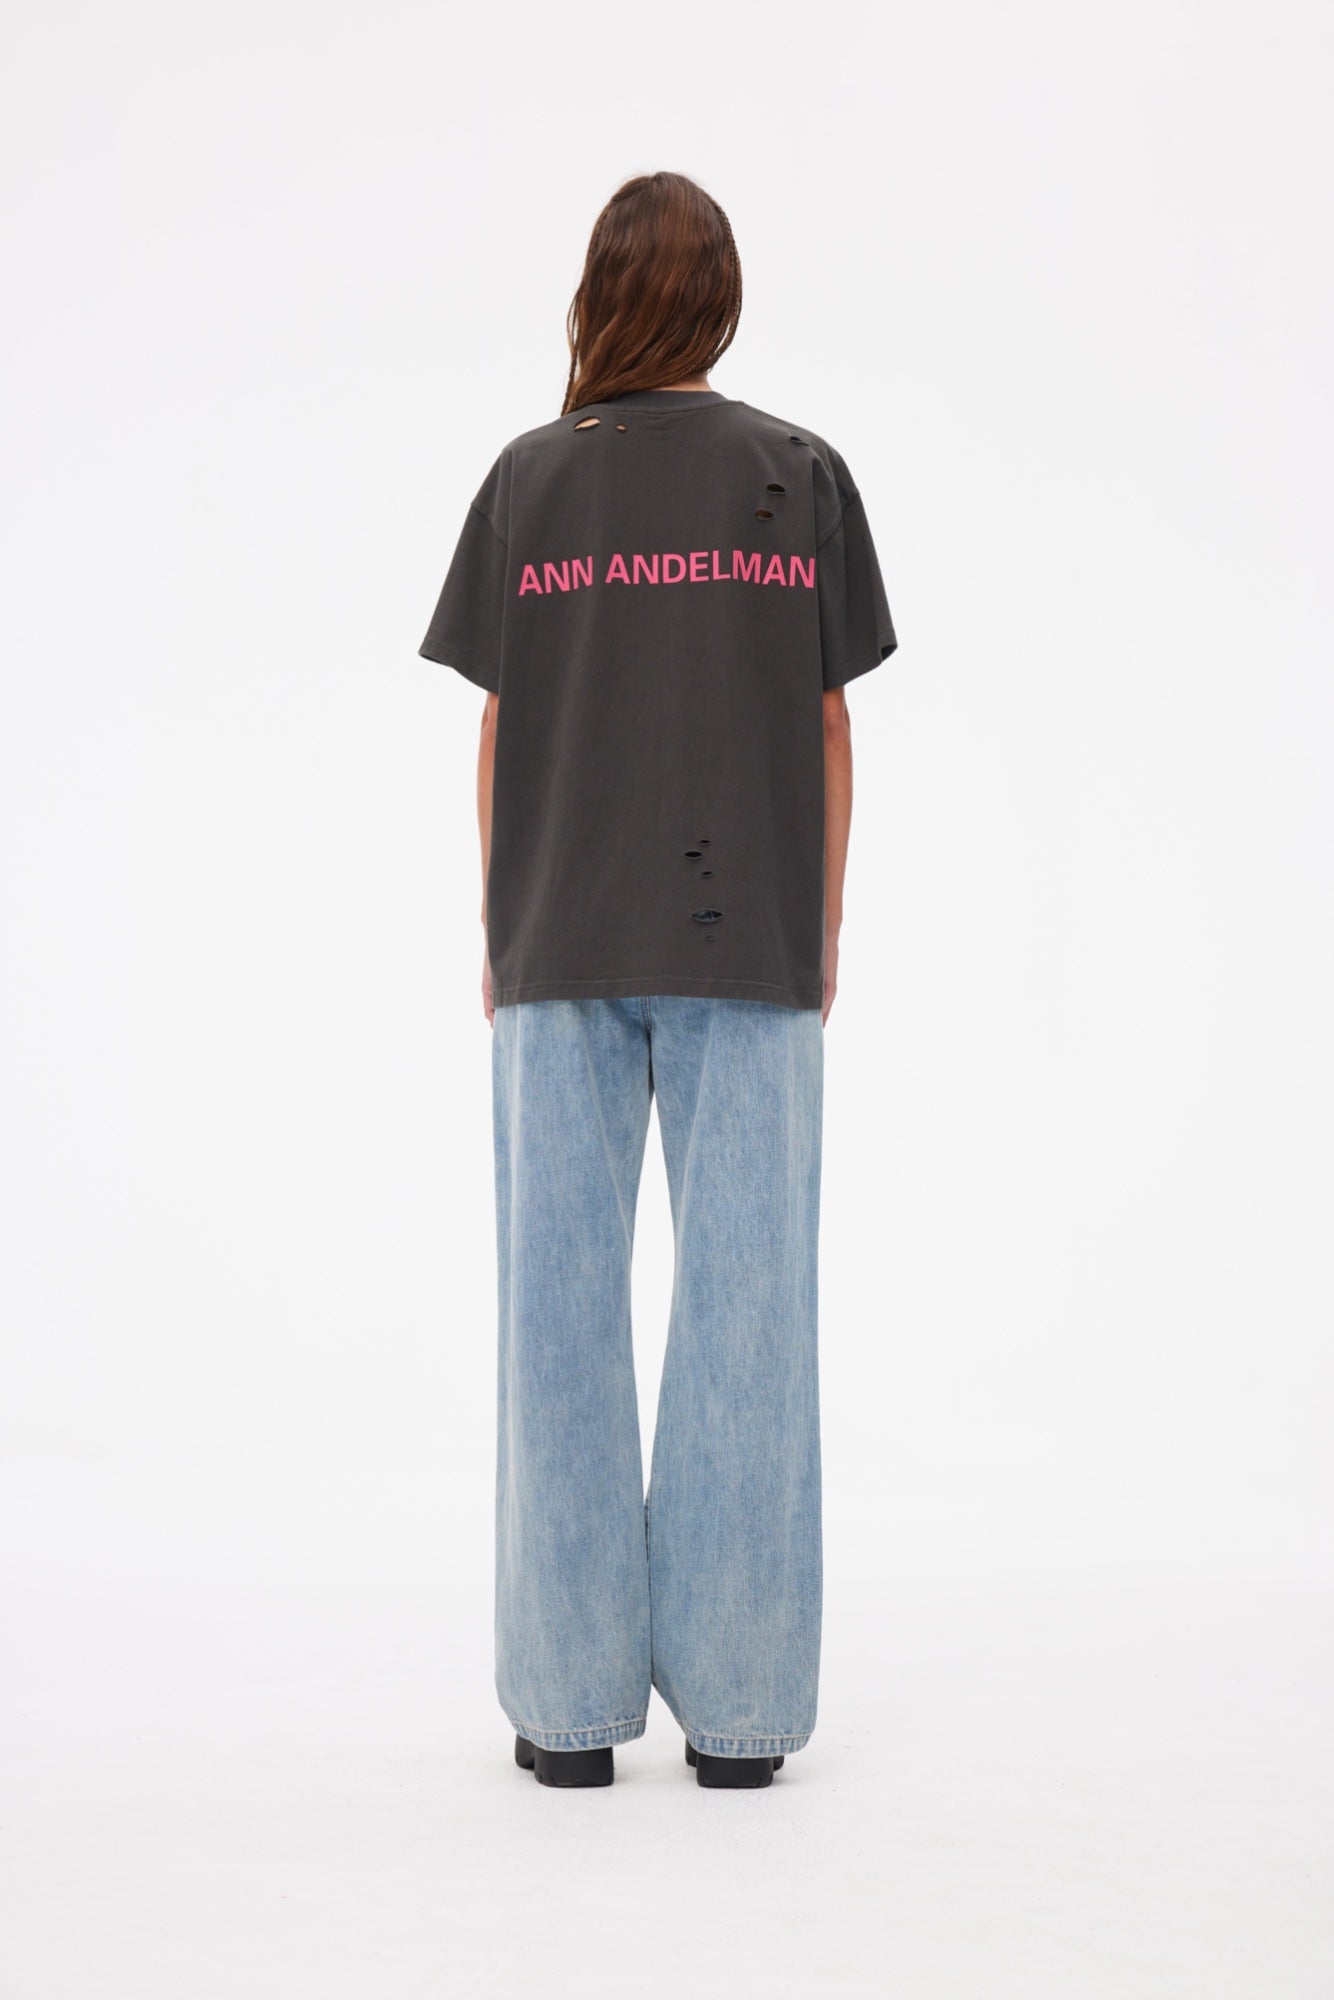 ANN ANDELMAN Limited Color T-shirt Grey | MADA IN CHINA